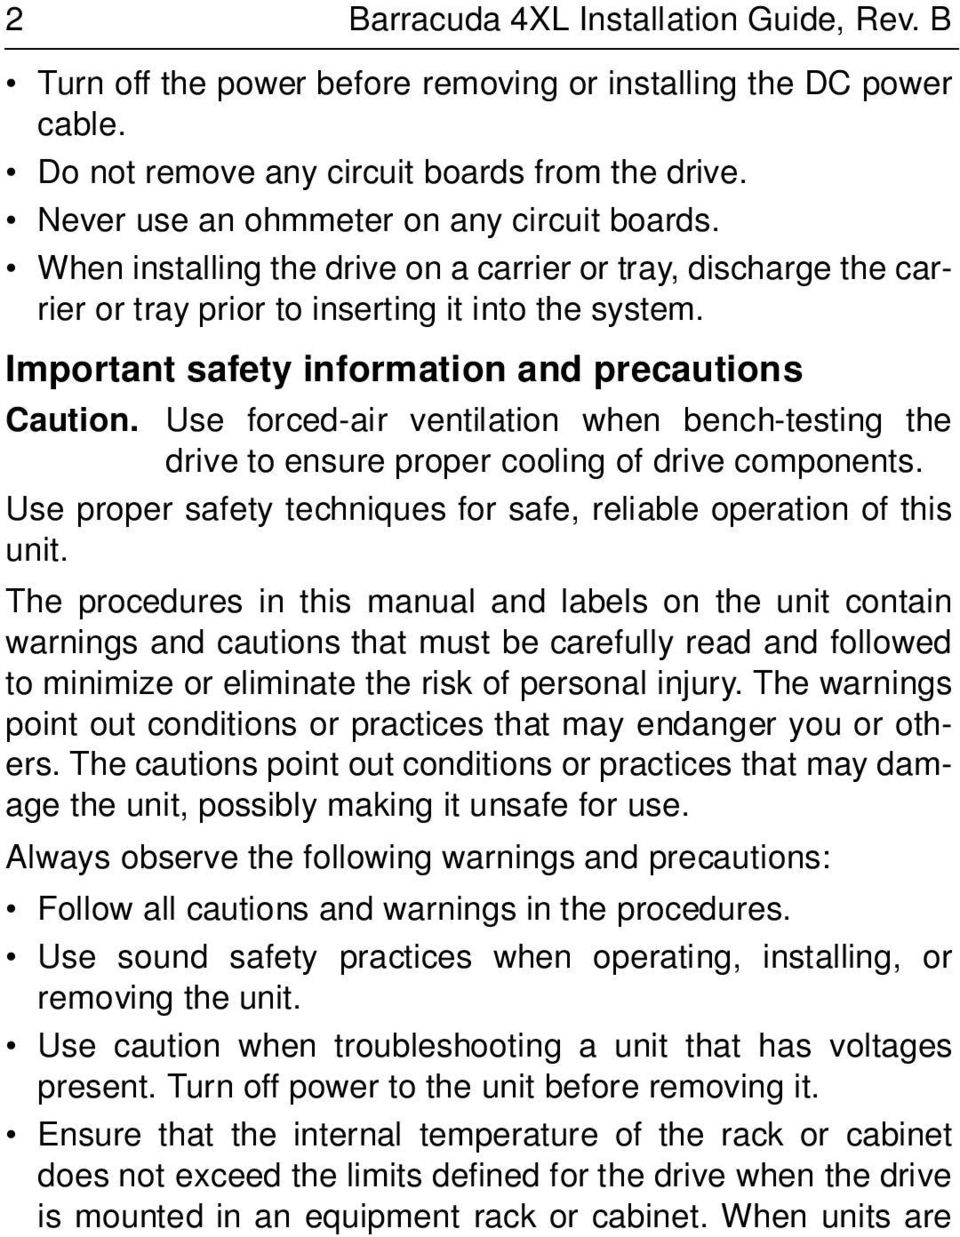 Important safety information and precautions Caution. Use forced-air ventilation when bench-testing the drive to ensure proper cooling of drive components.